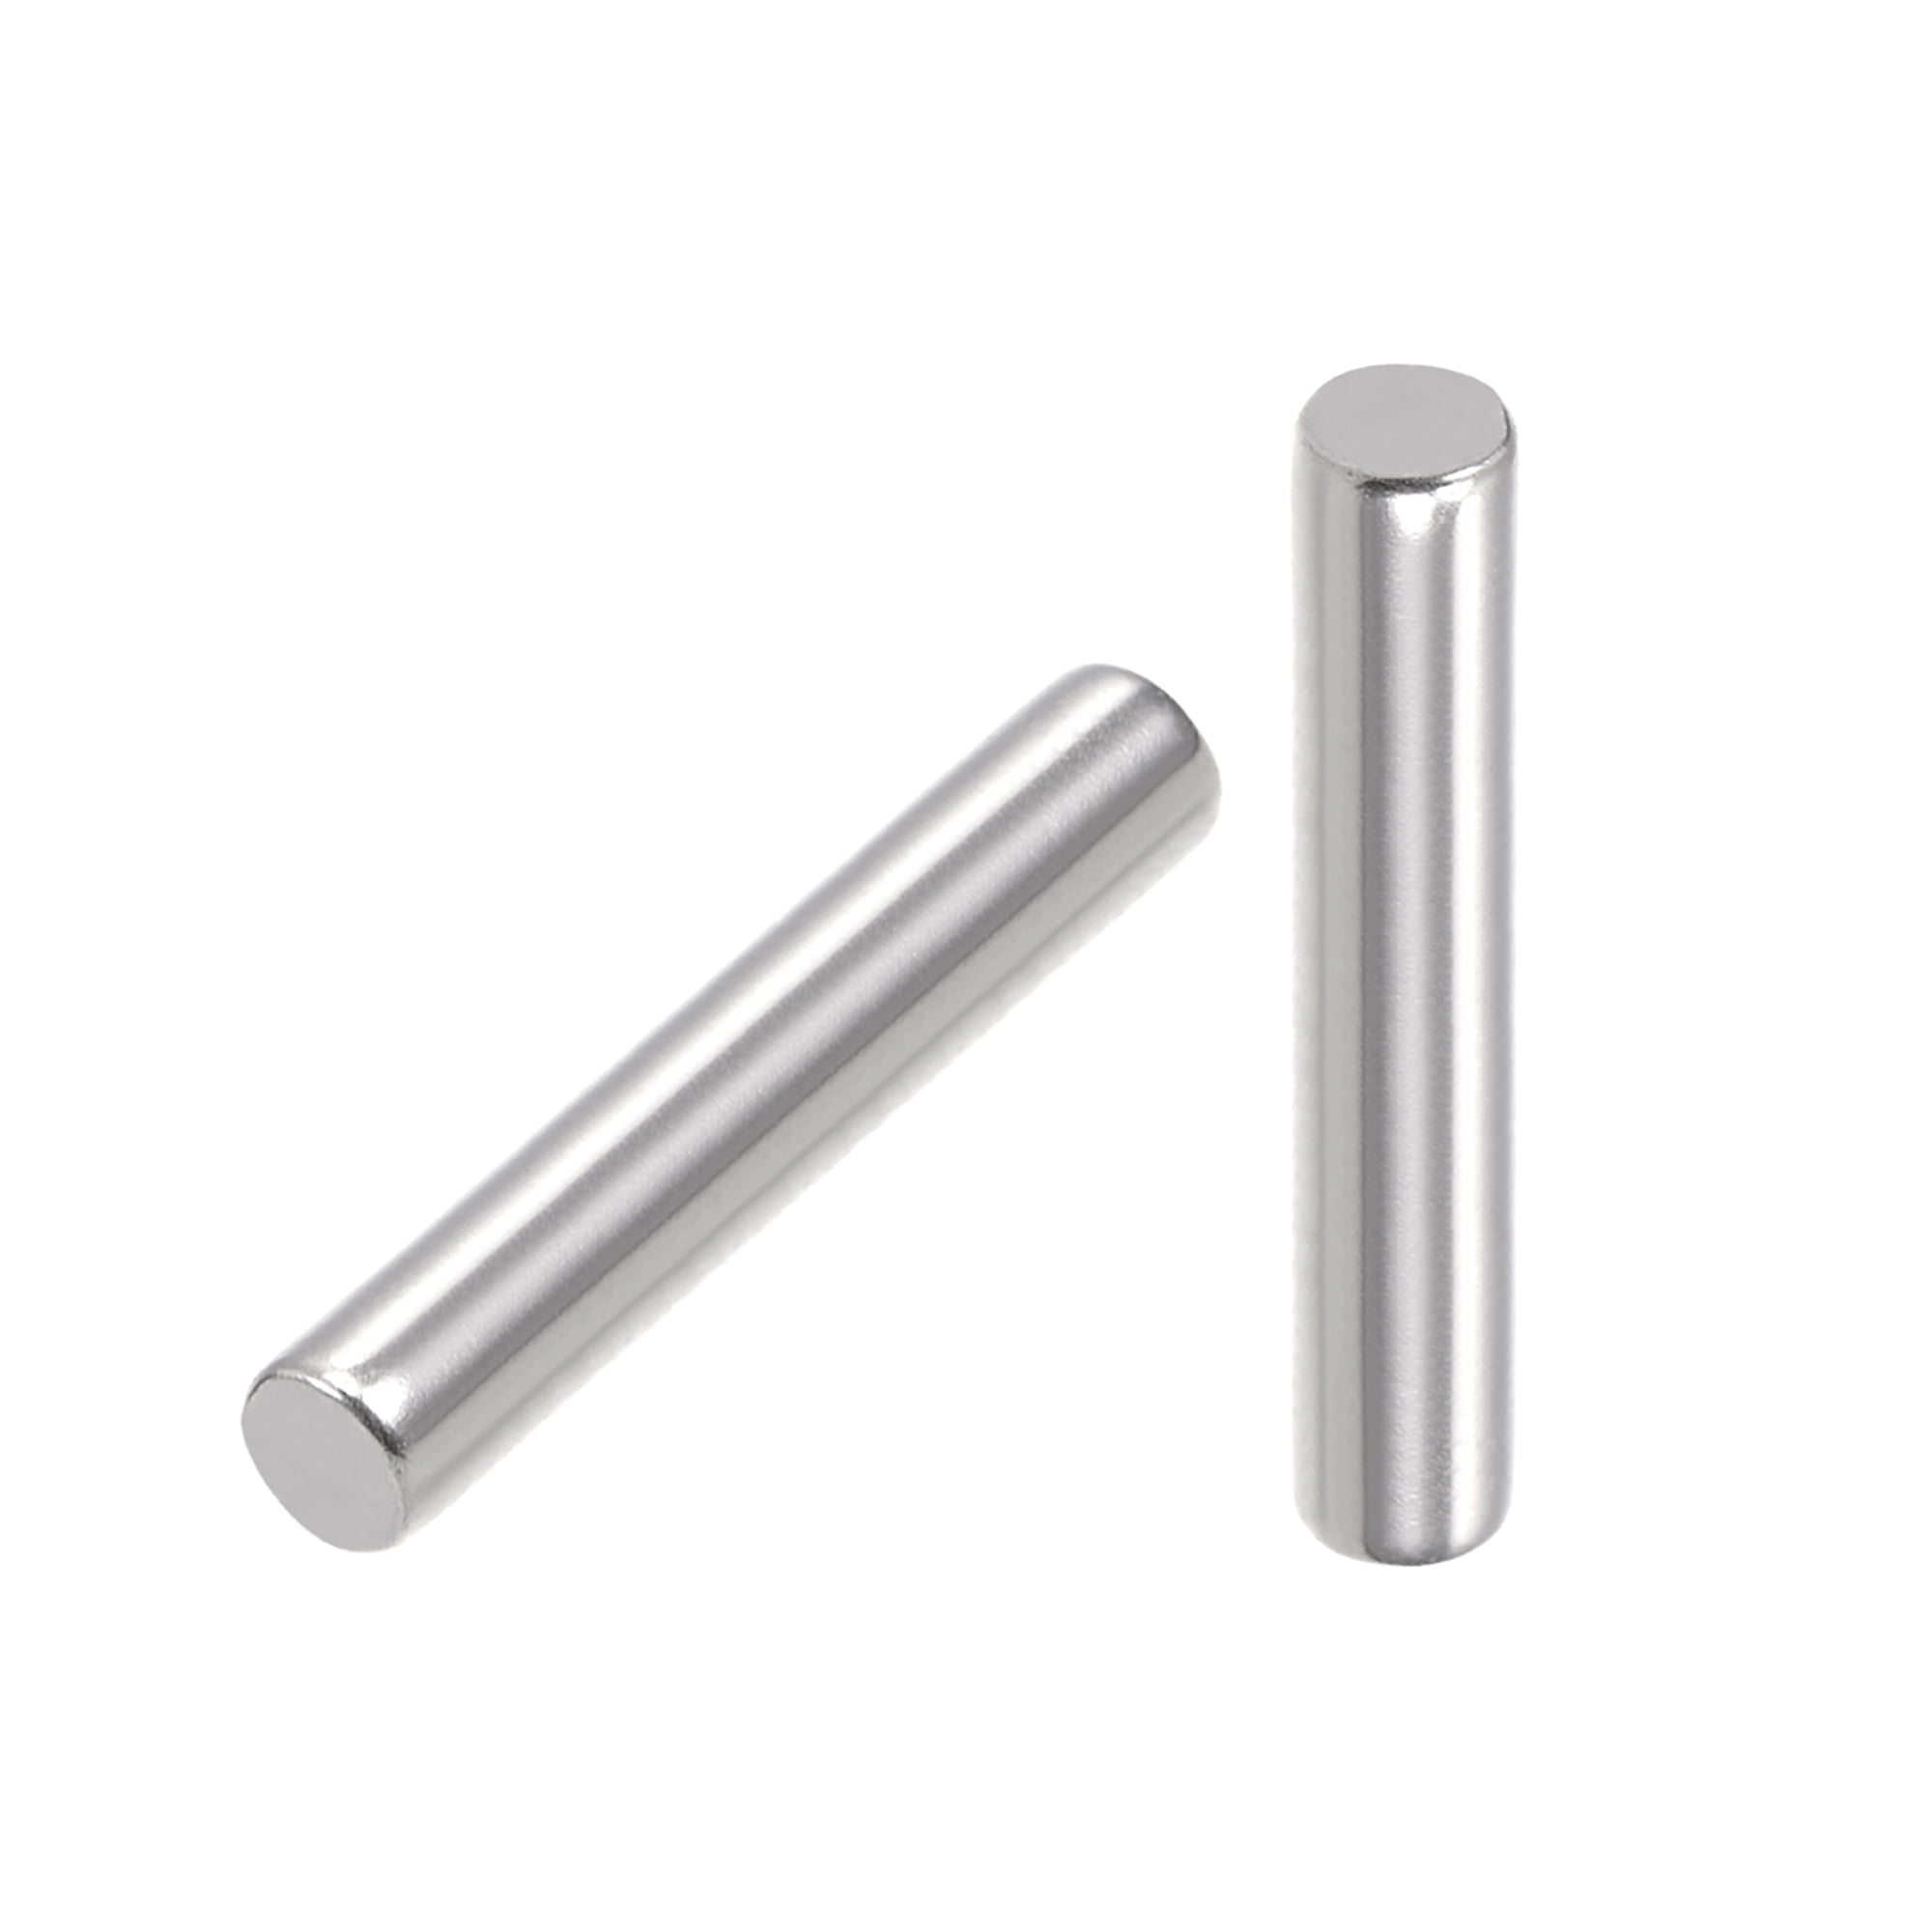 M8 X 20 Dowel Pin A2 Stainless Steel Package Qty 100 